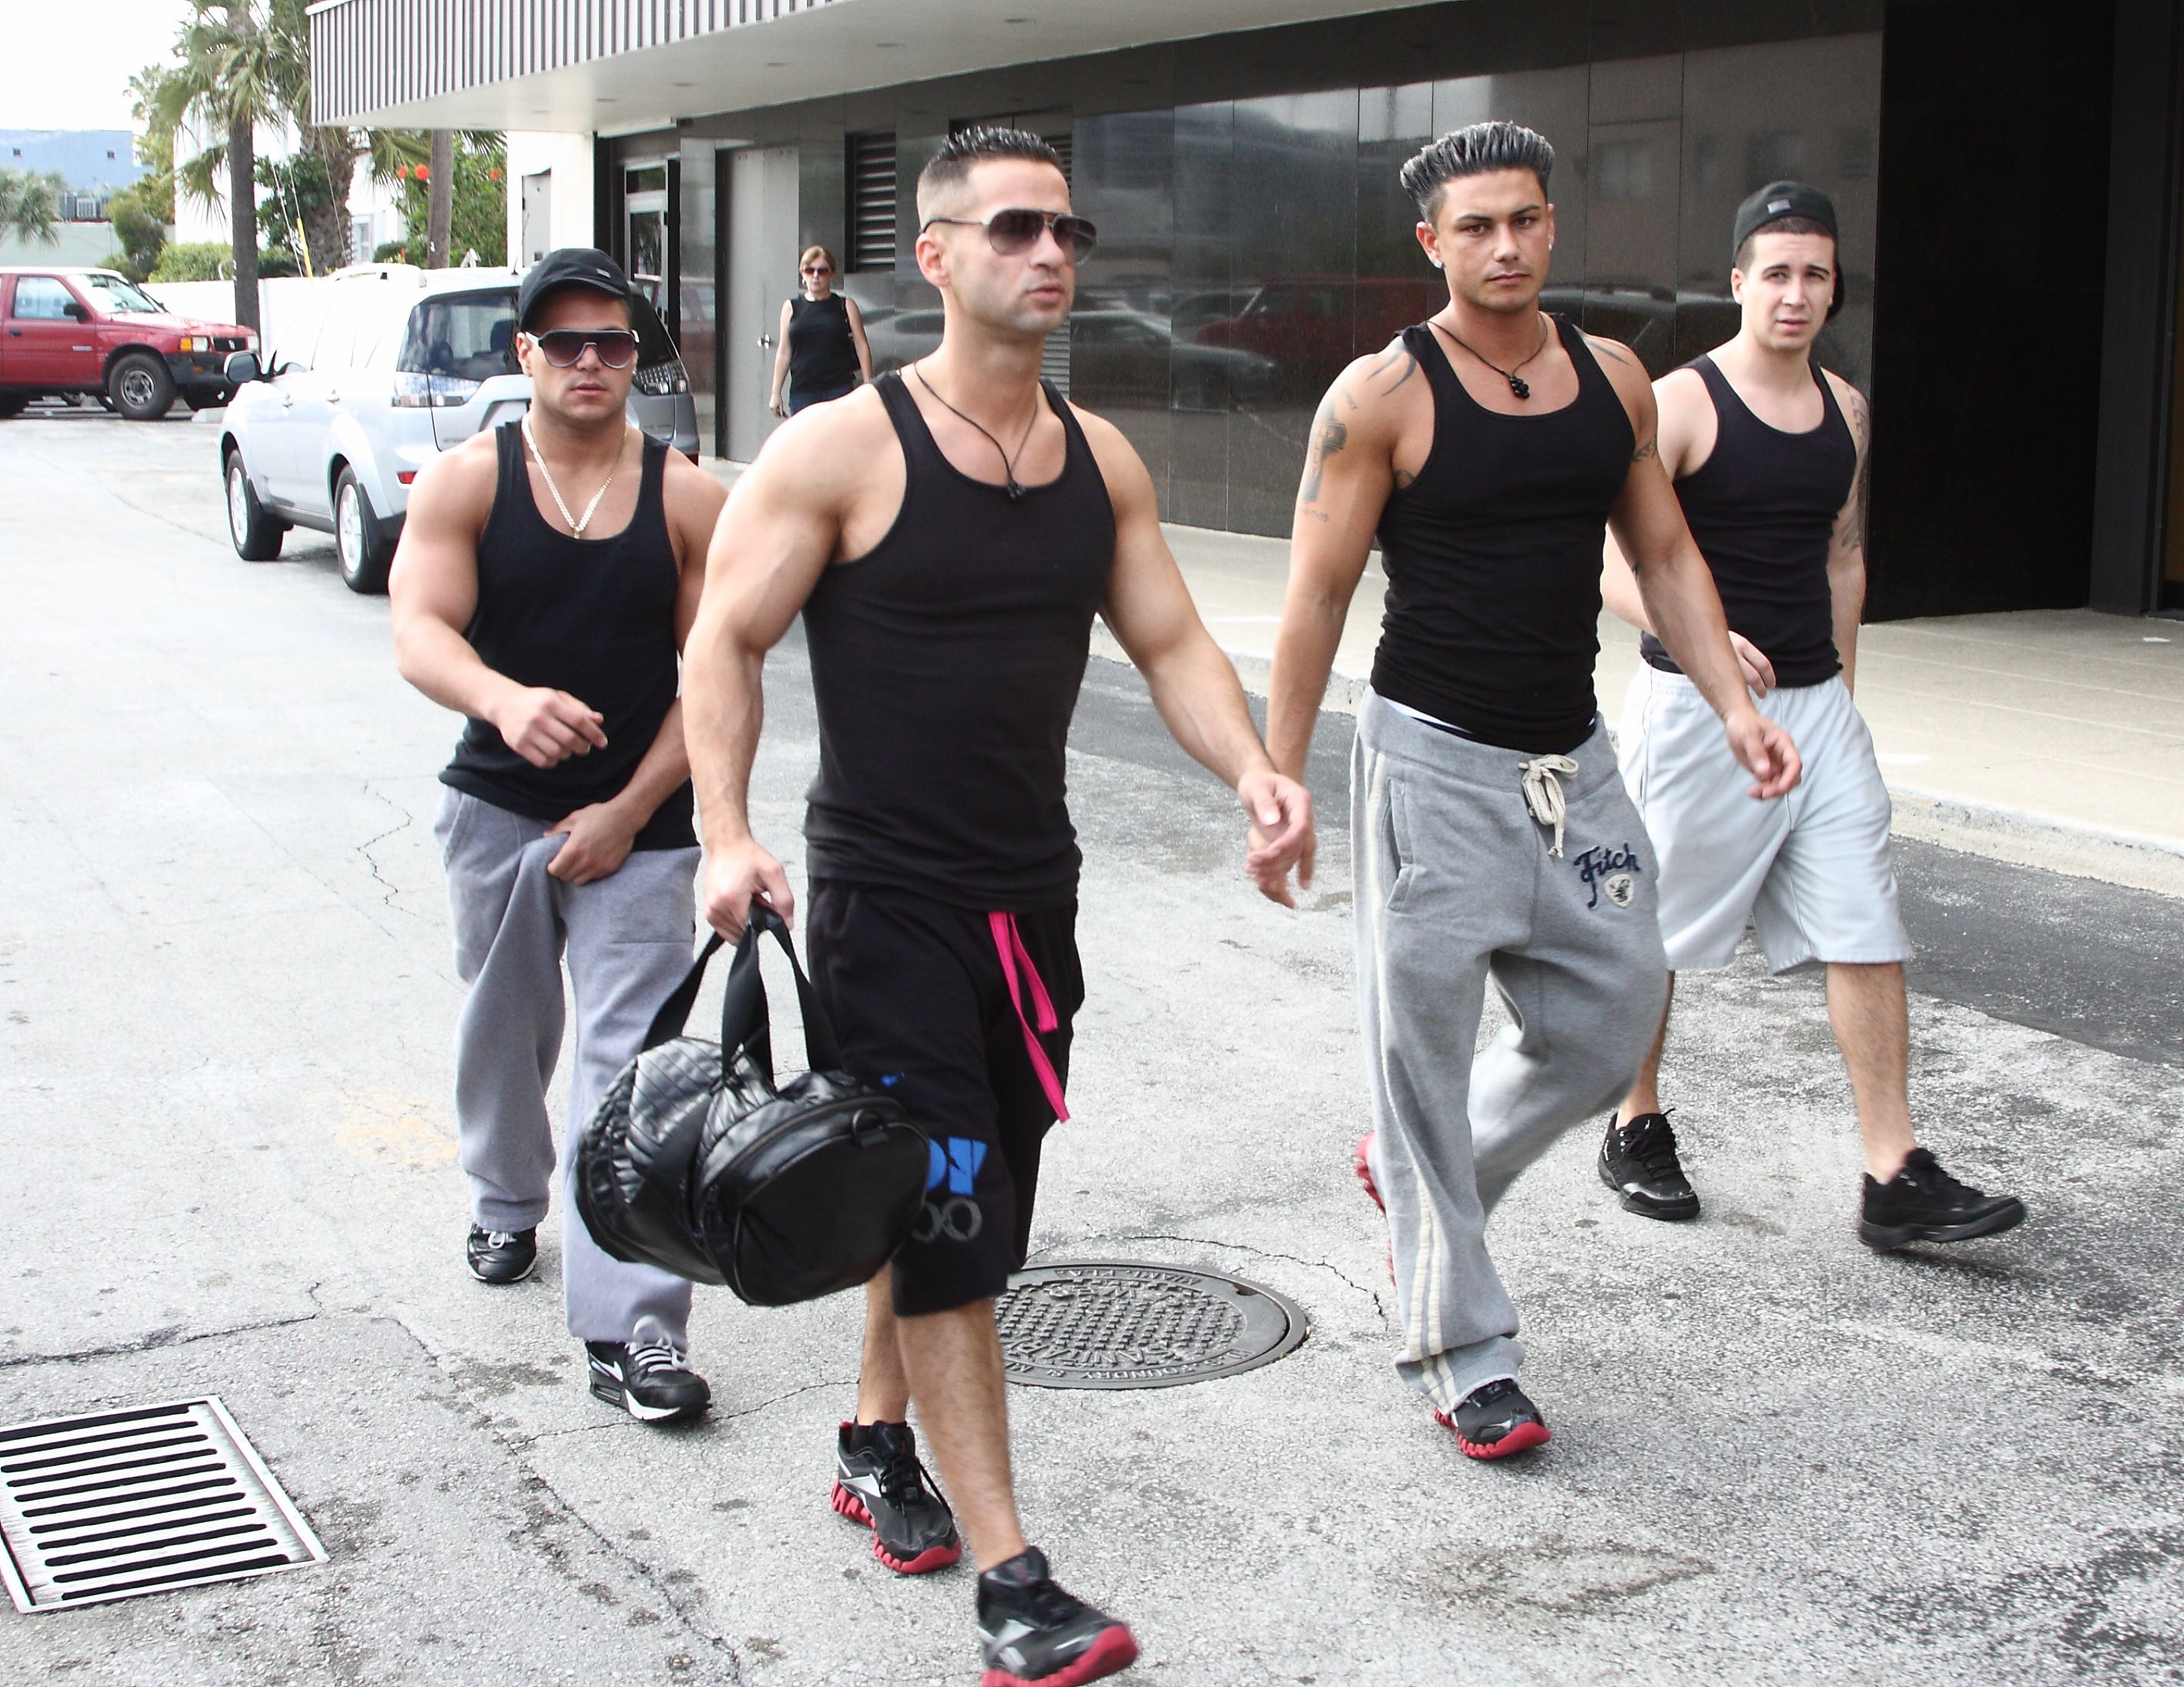 Is it possible to make over the 'Jersey Shore' guys?